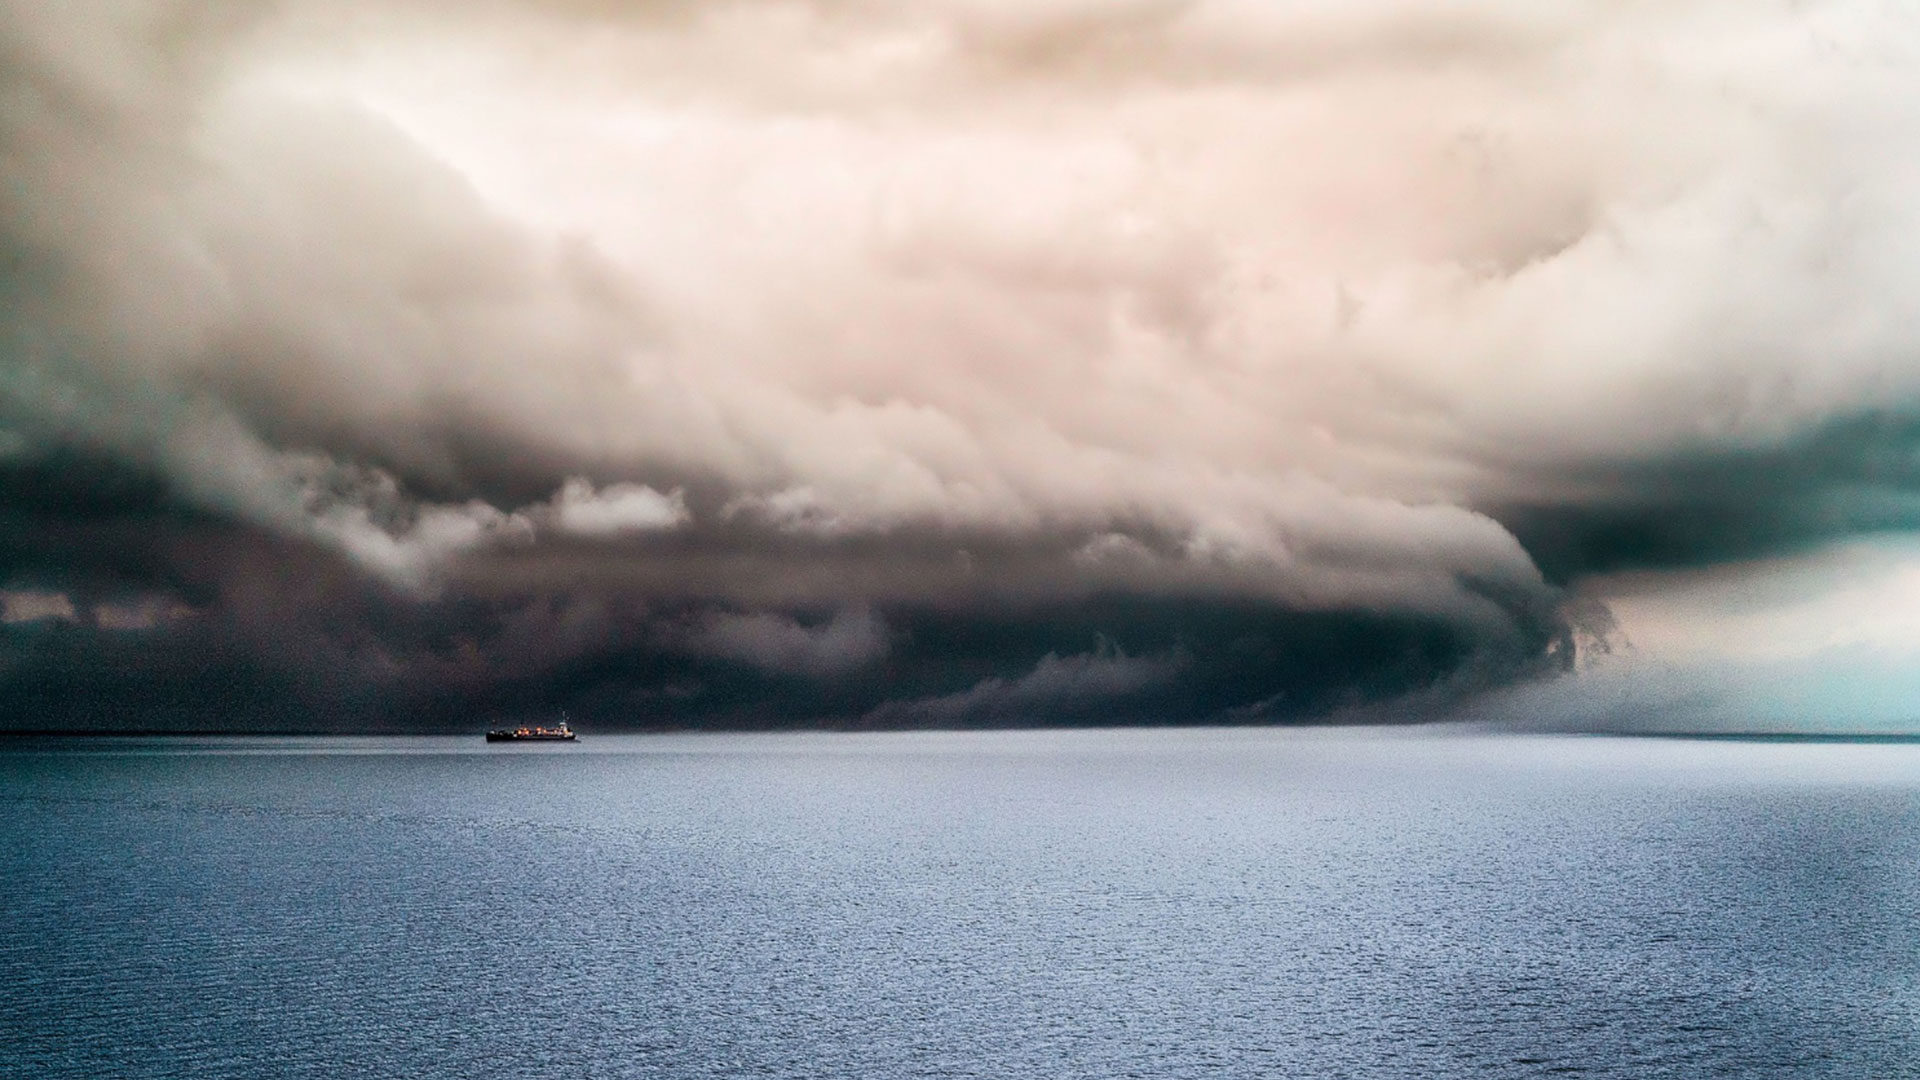 storm over freight ship